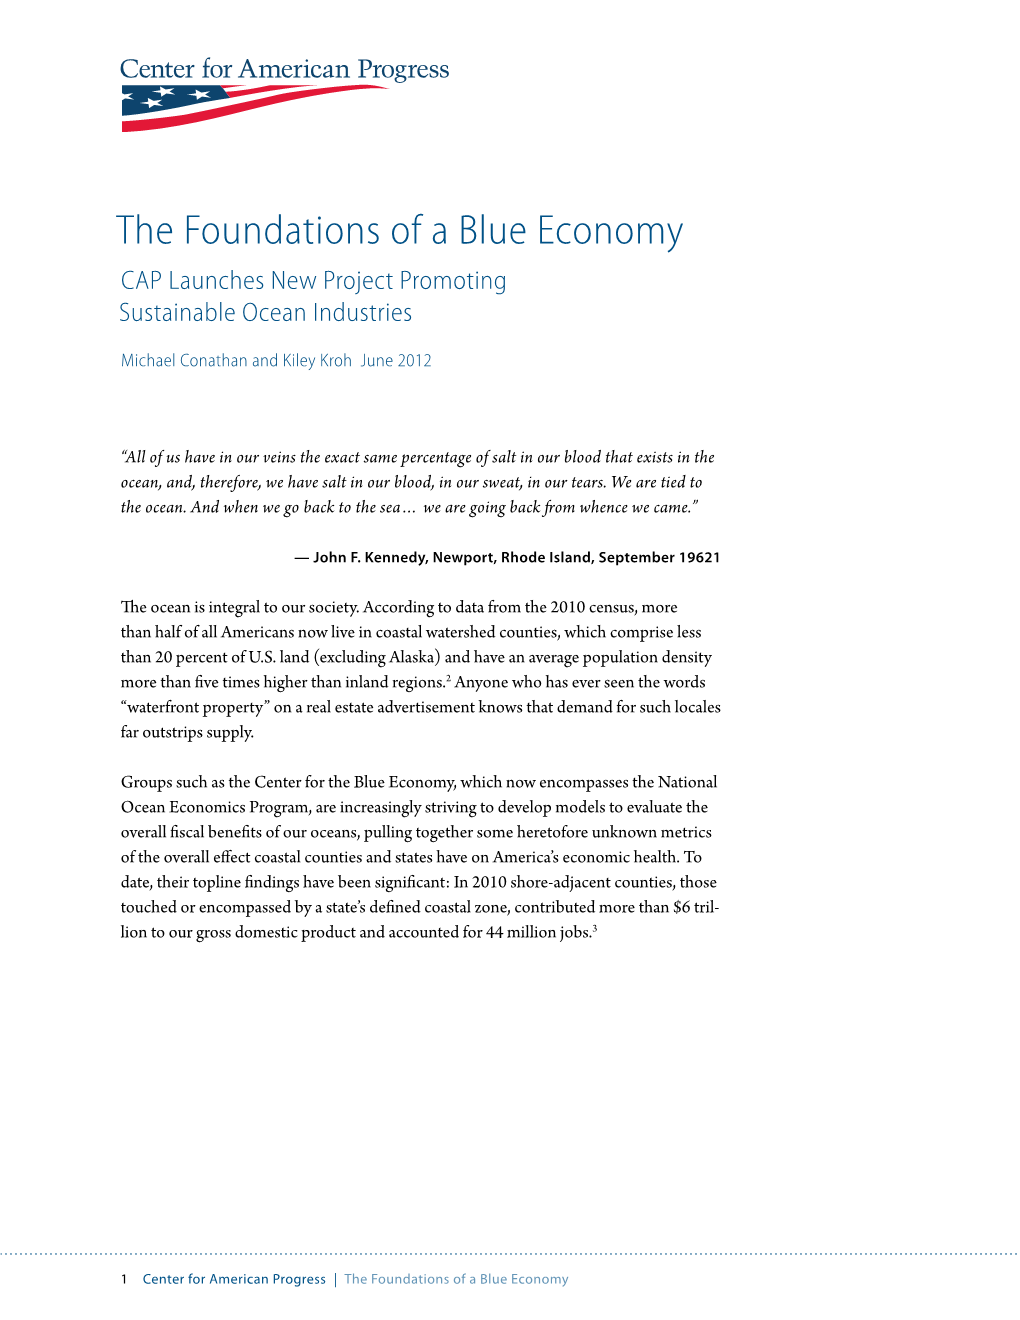 The Foundations of a Blue Economy CAP Launches New Project Promoting Sustainable Ocean Industries